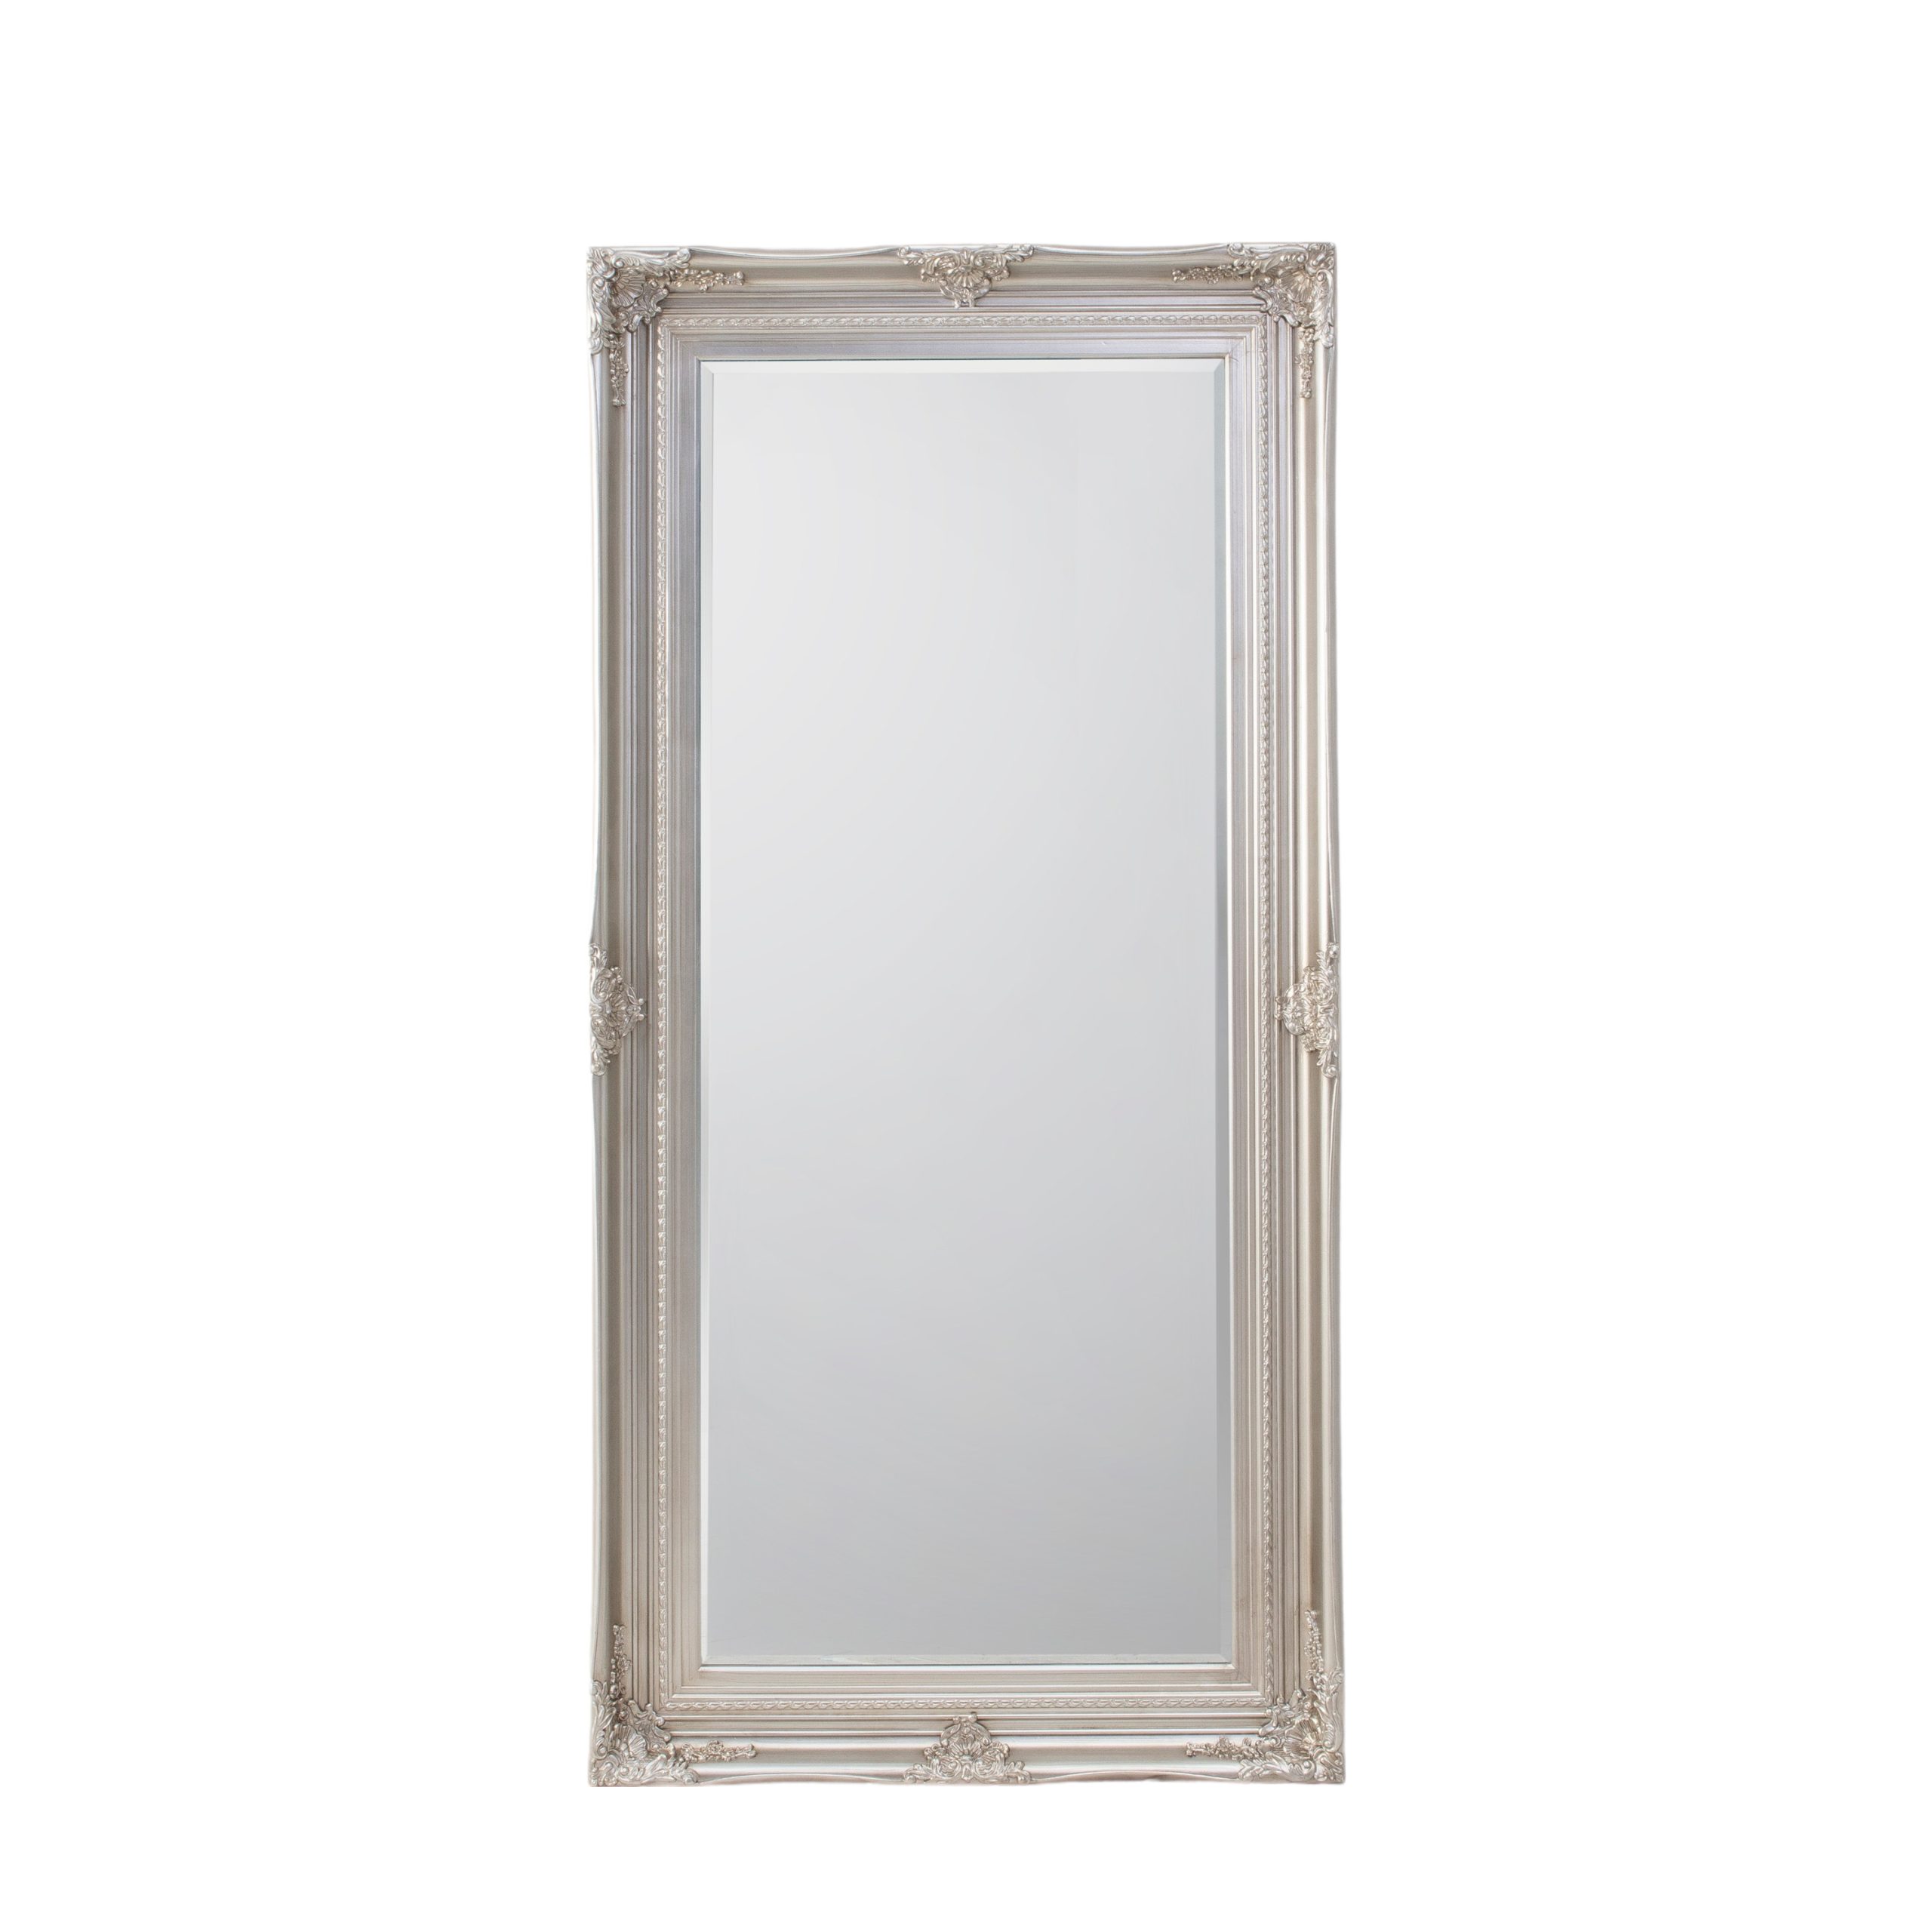 Gallery Direct Hampshire Leaner Mirror Antique Silver